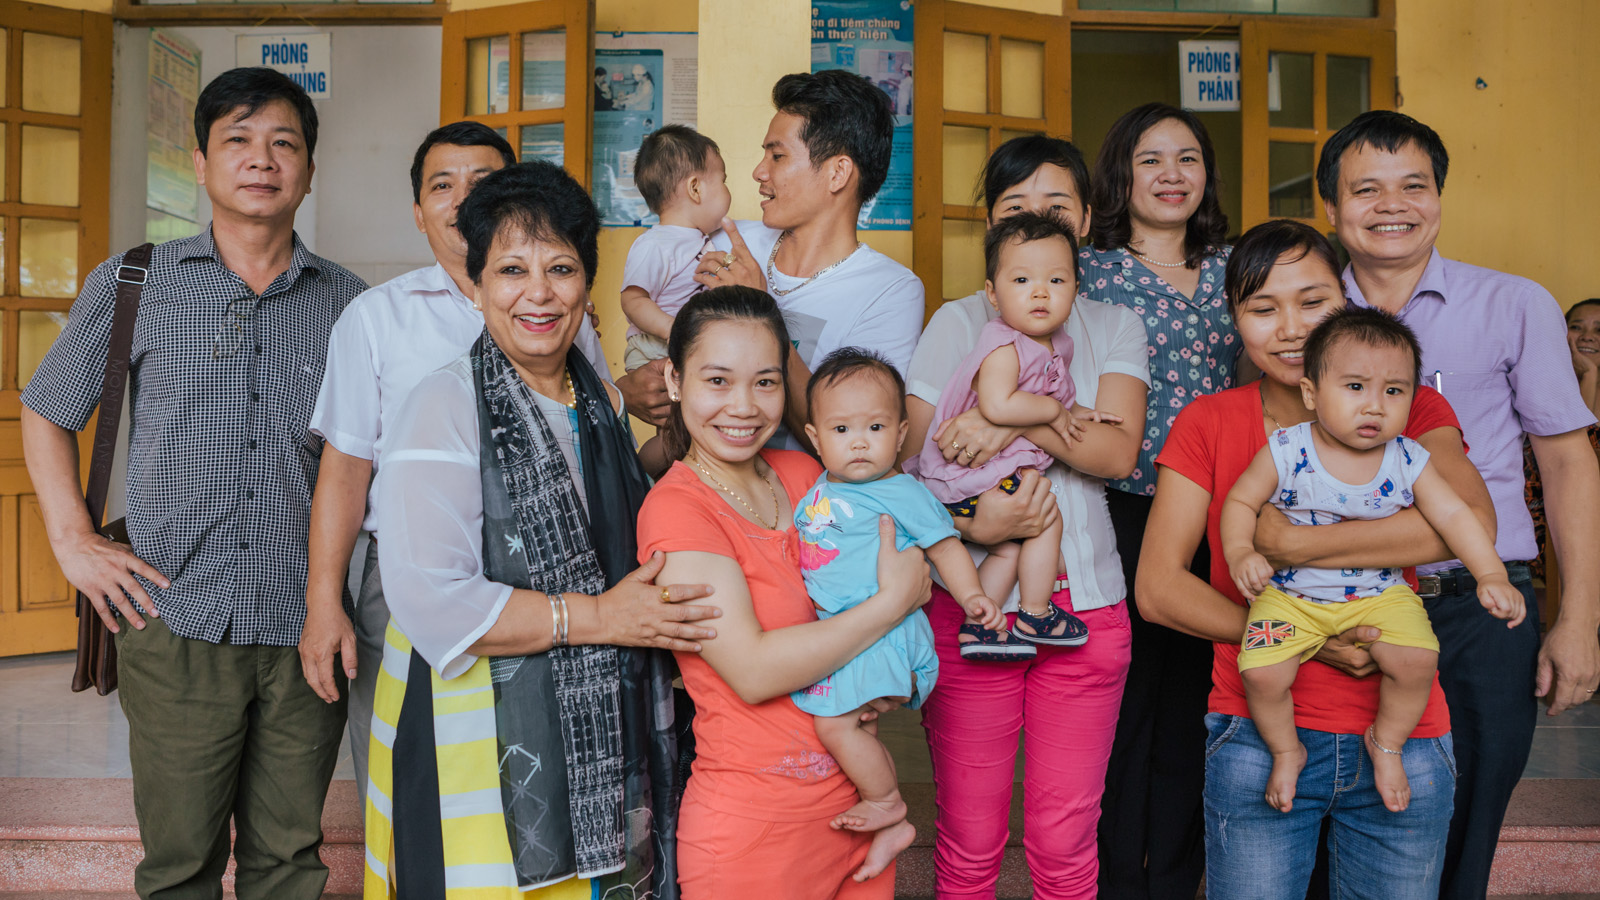 The author with parents at the community clinic. Photo: Gavi 2017/ Đạt Nguyễn.